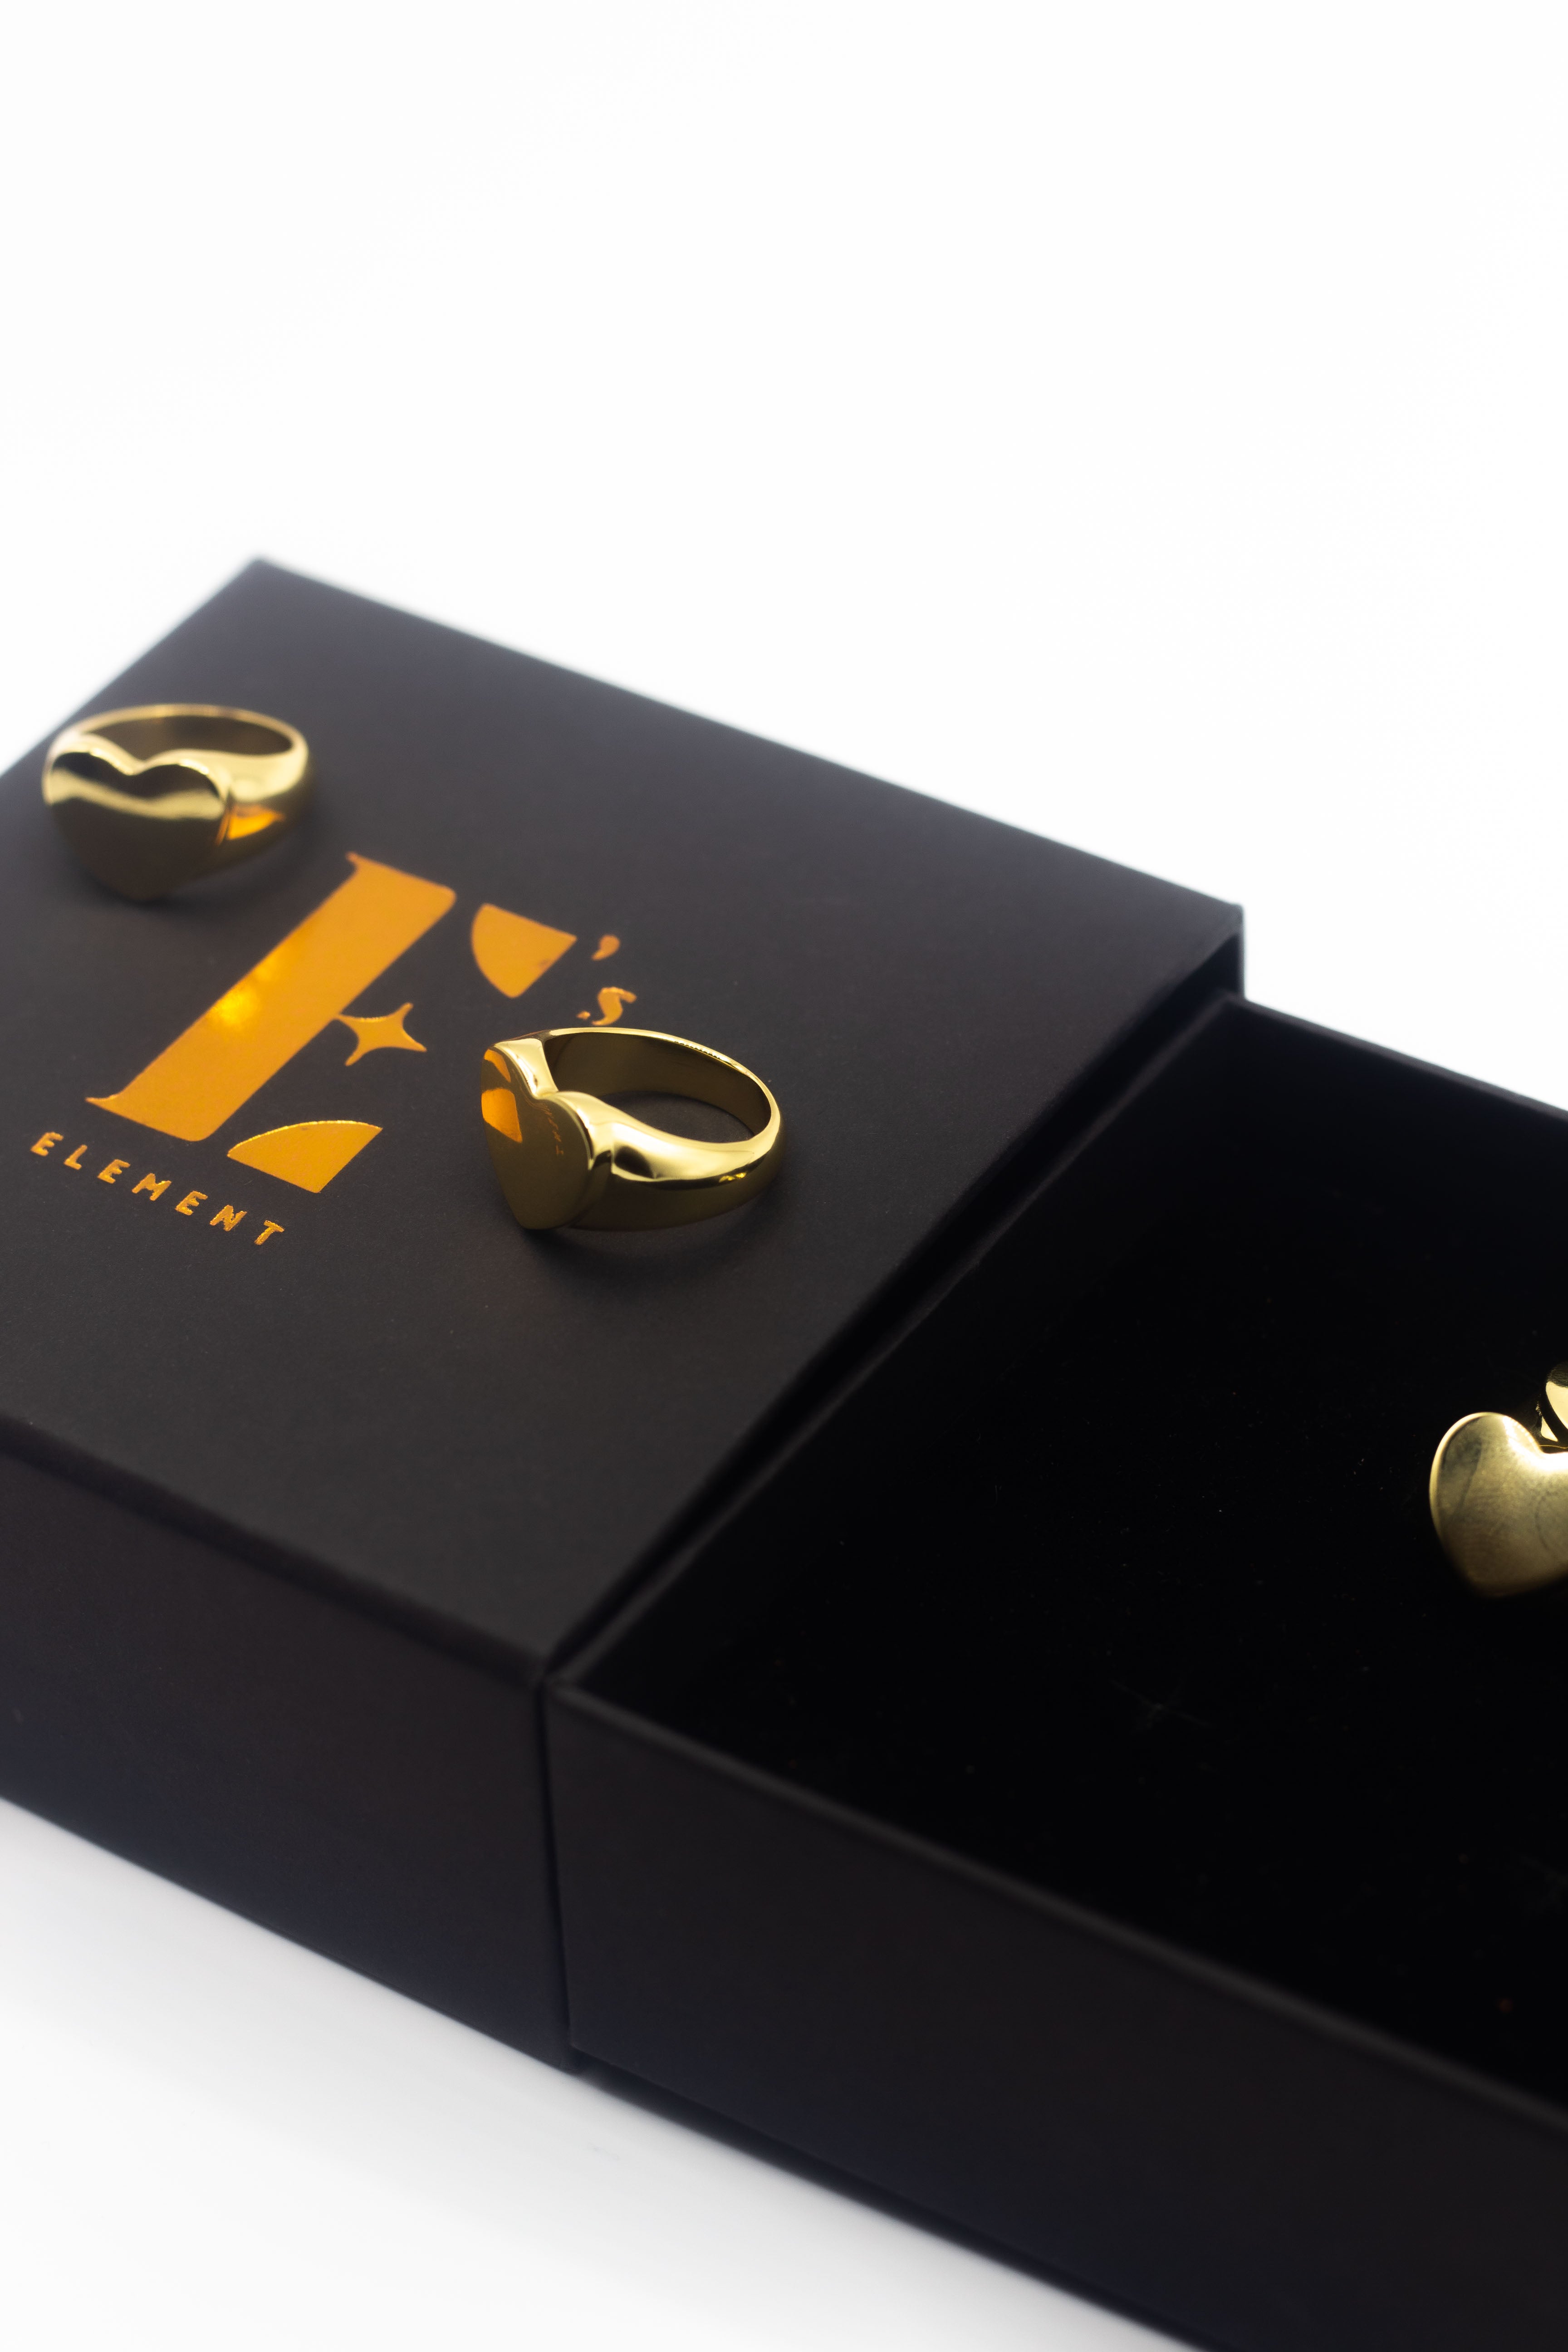 Two 18k gold heart signet rings resting on a black box with the E's Element logo imprinted in yellow. On the right is an opened black box with an 18k gold heart signet ring. Ellina Heart Signet Ring by E's Element.